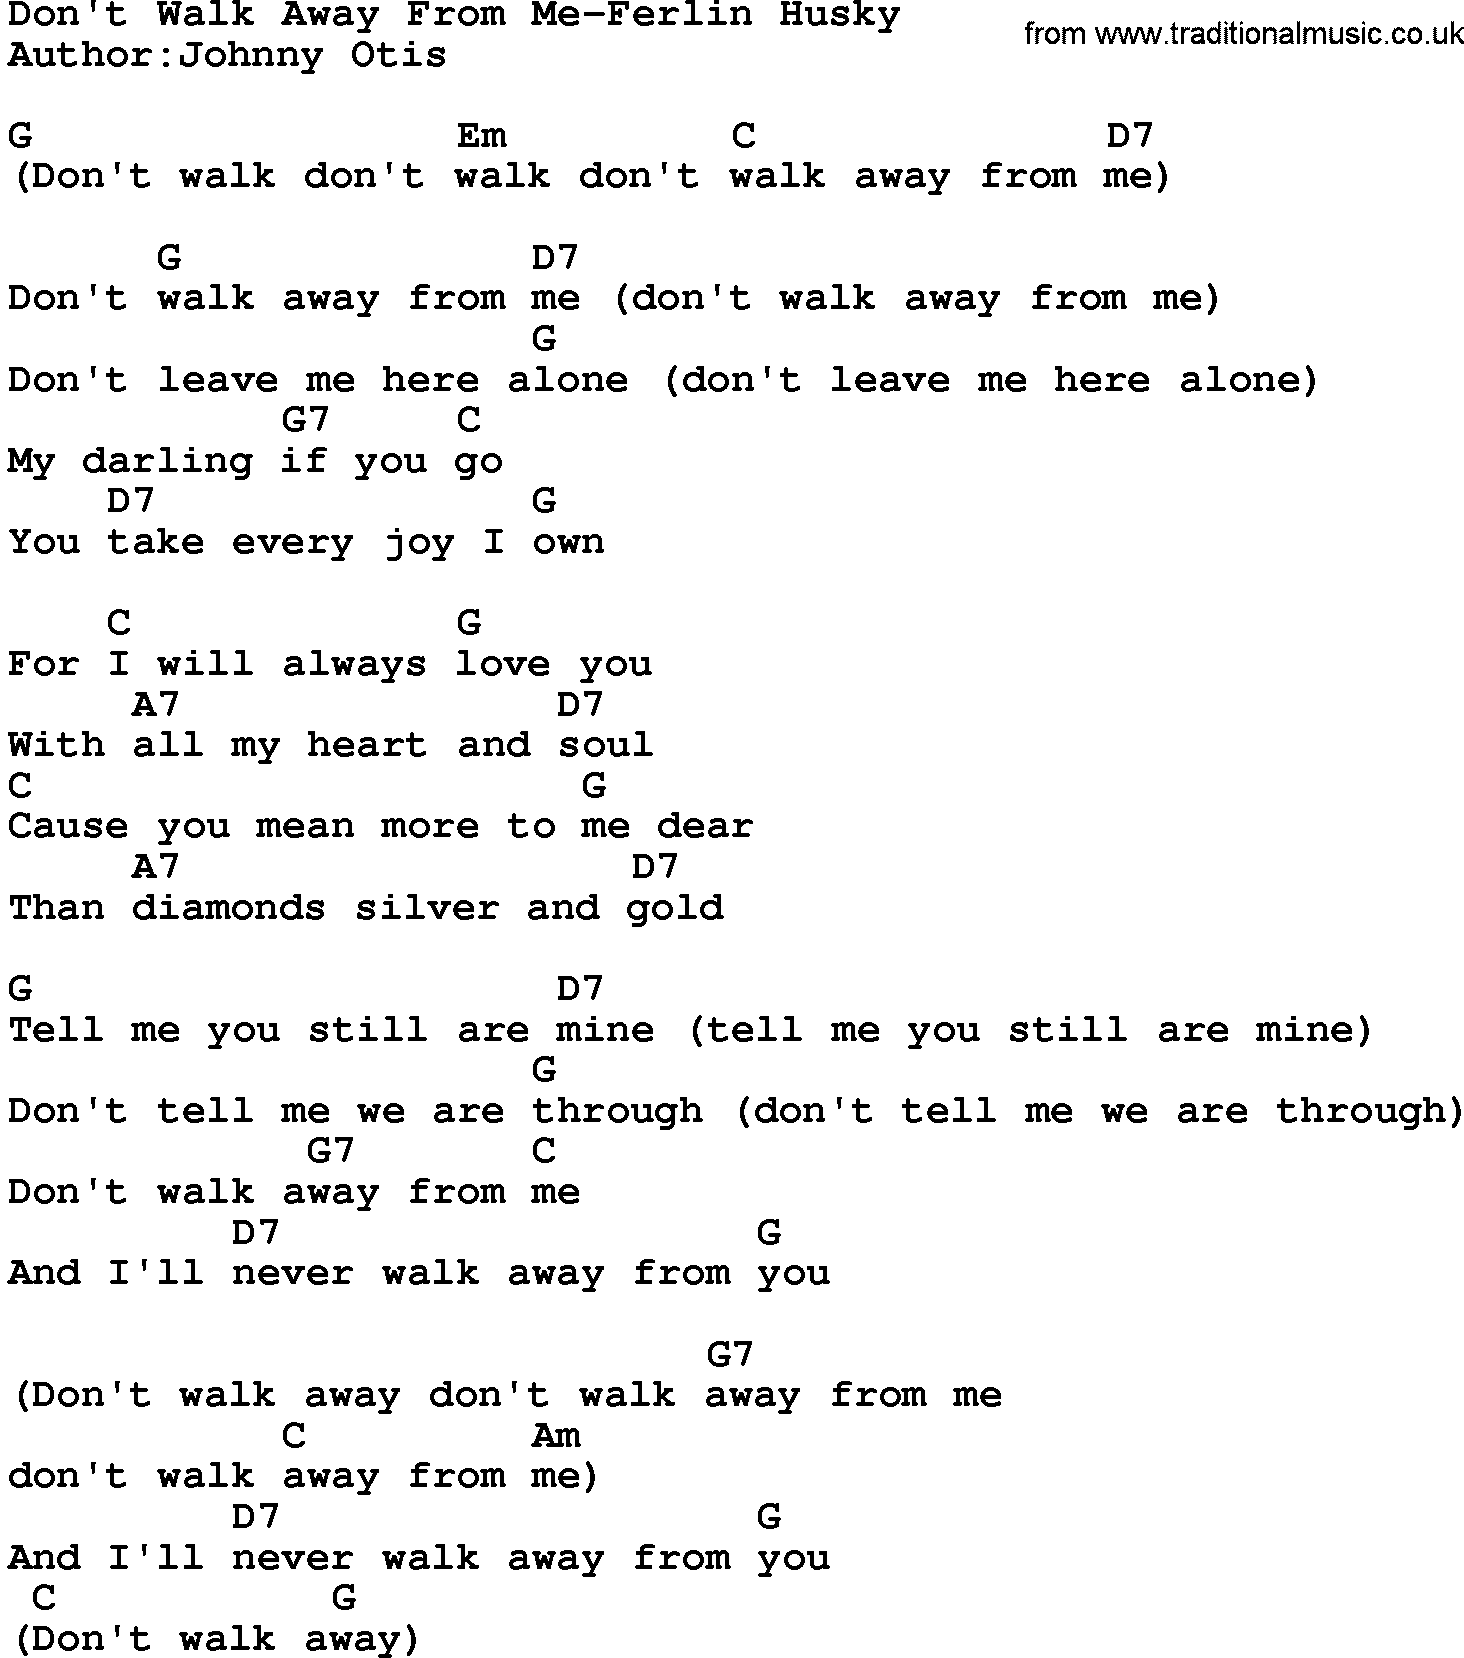 Country music song: Don't Walk Away From Me-Ferlin Husky lyrics and chords